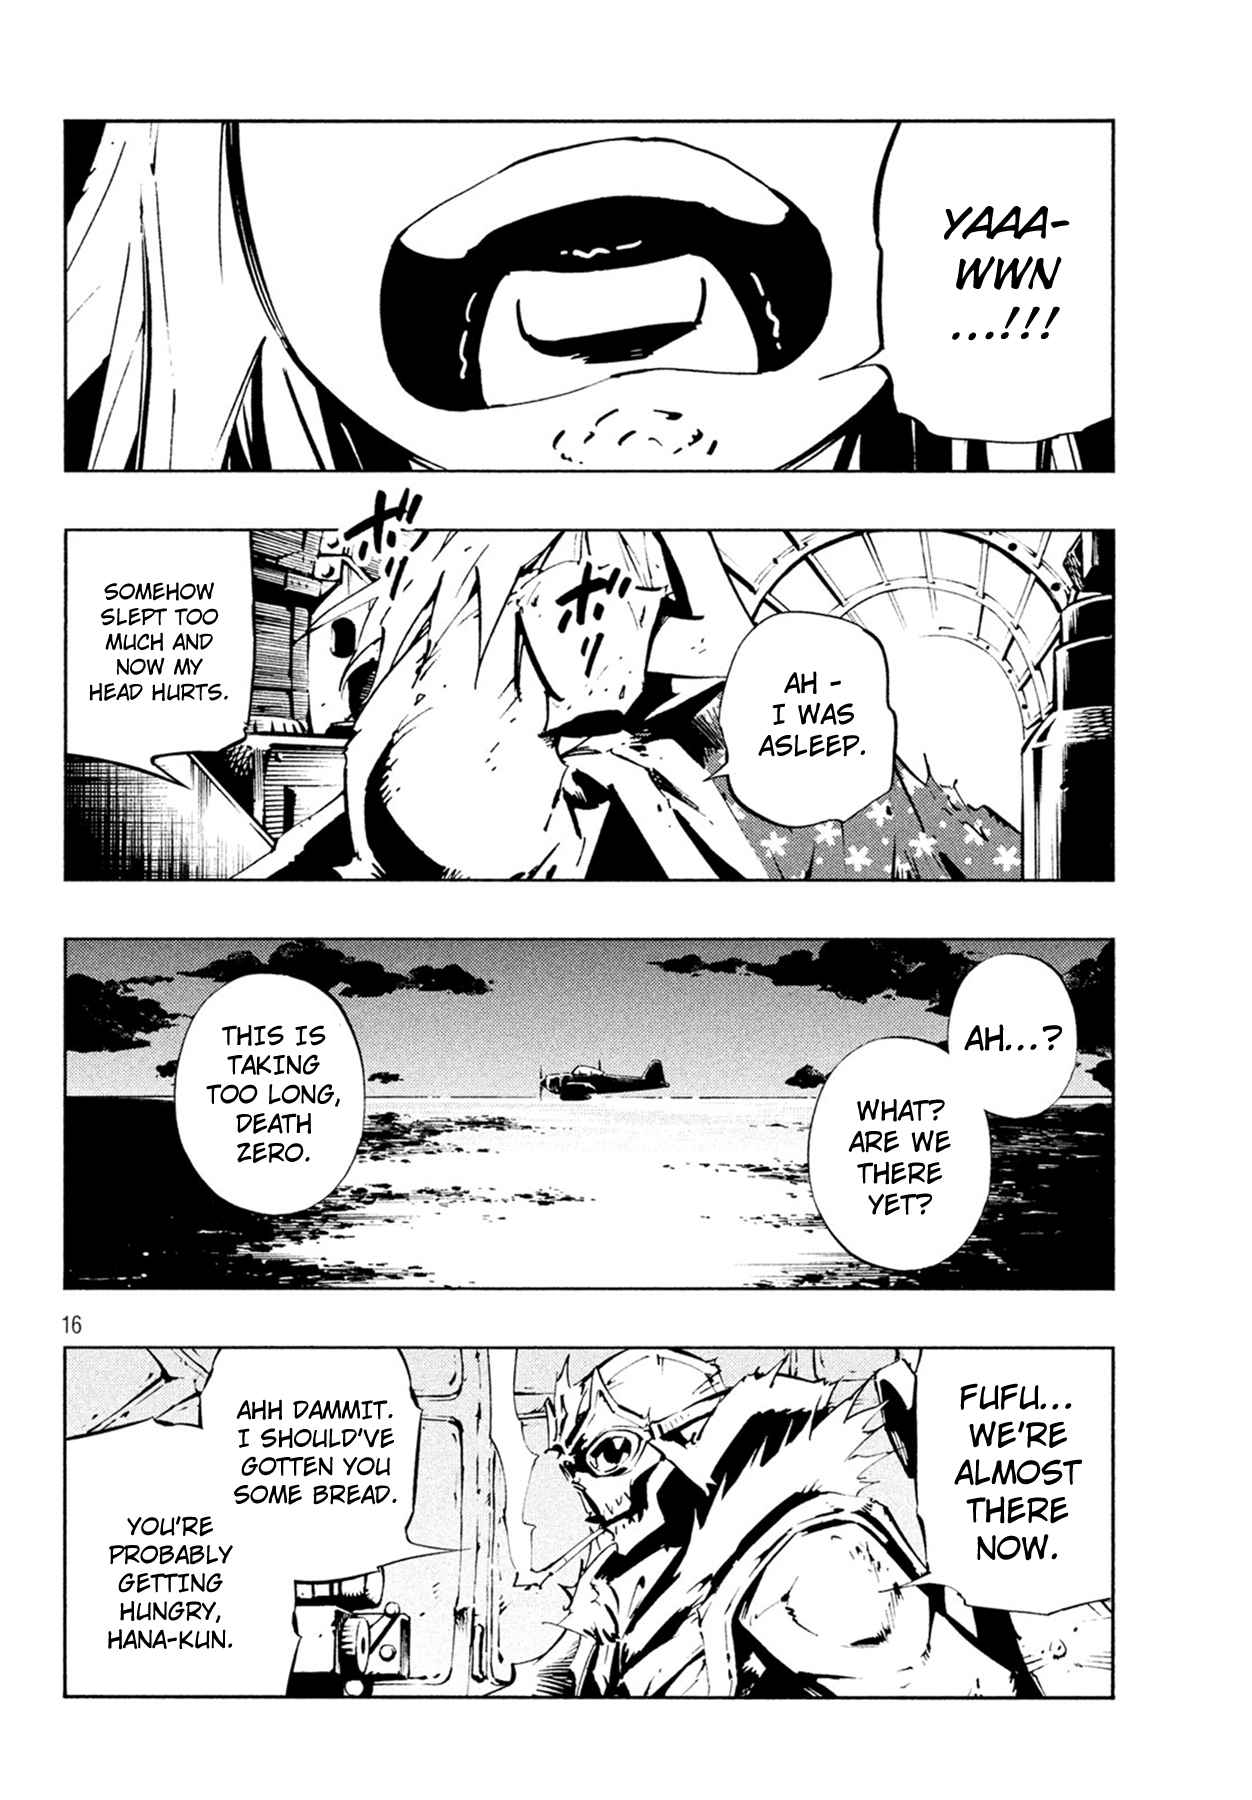 Shaman King: The Super Star Vol. 1 Ch. 6 Fight of the Zero Fighter's Departure